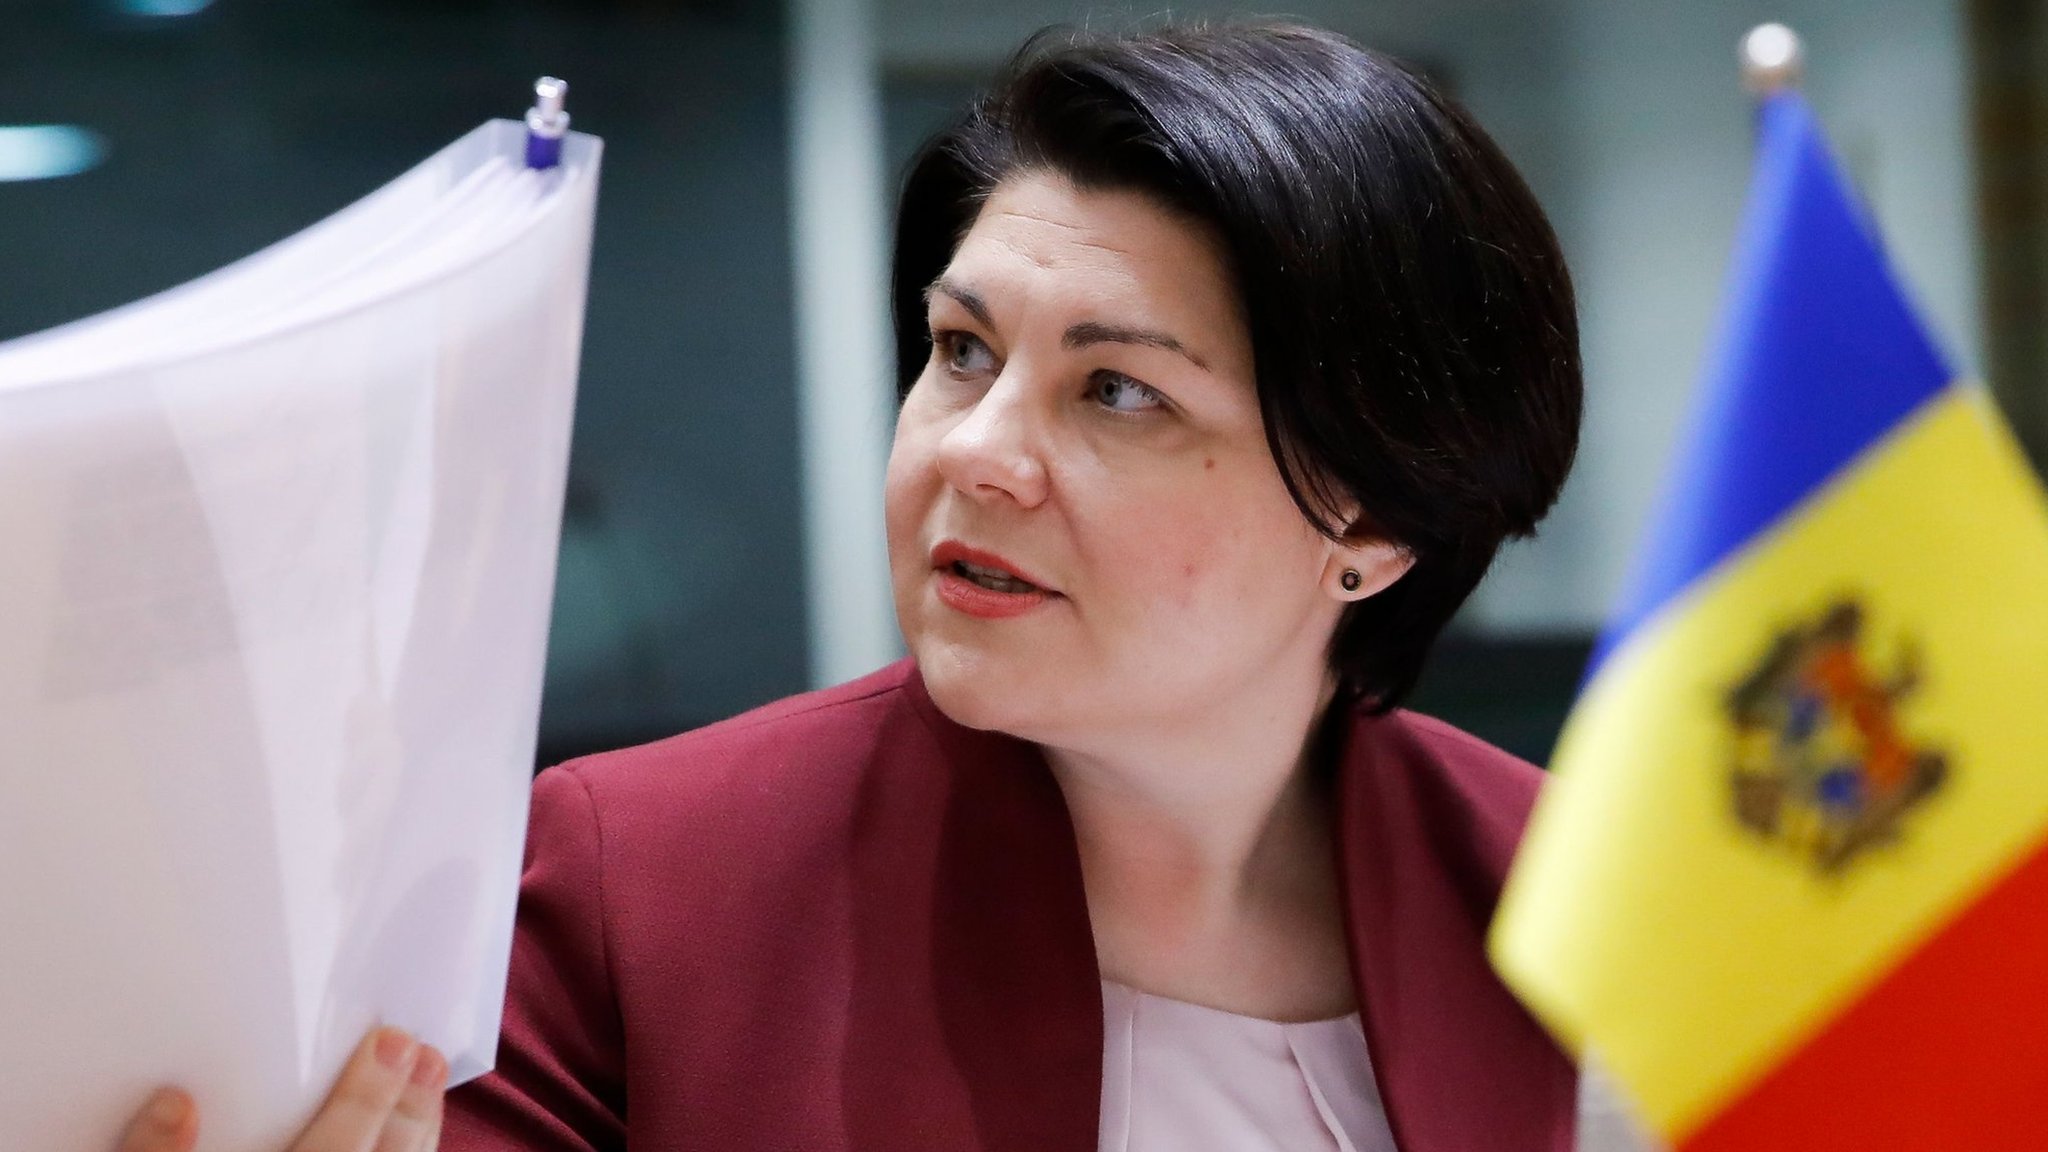 Moldovan government resigns after multiple crises